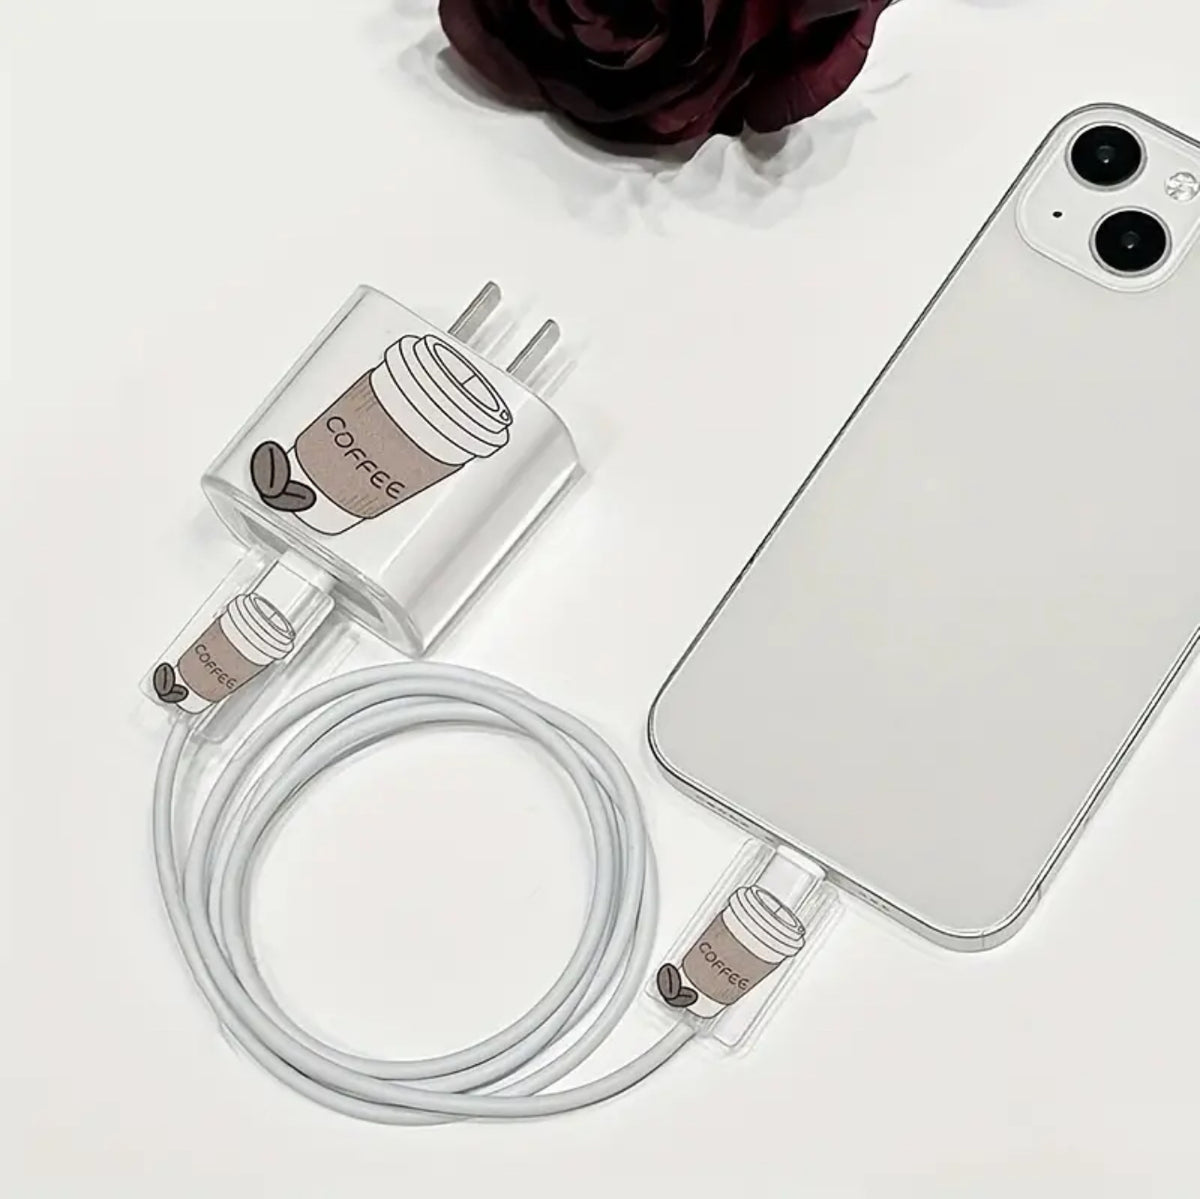 iPhone -Charger Data Cable Protective Sleeves